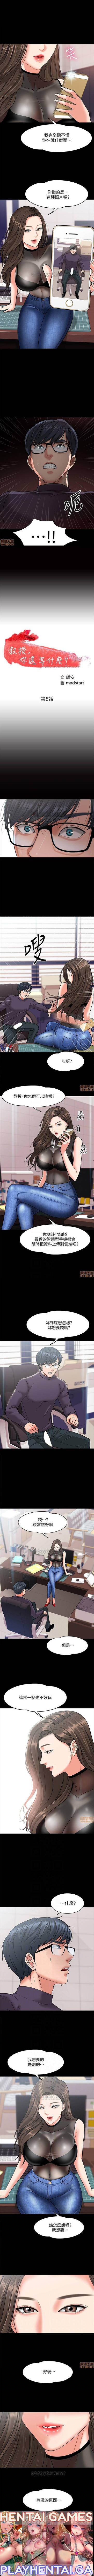 Gay Amateur PROFESSOR, ARE YOU JUST GOING TO LOOK AT ME? | DESIRE SWAMP | 教授，你還等什麼? Ch. 5 [Chinese] Manhwa Rola - Page 2